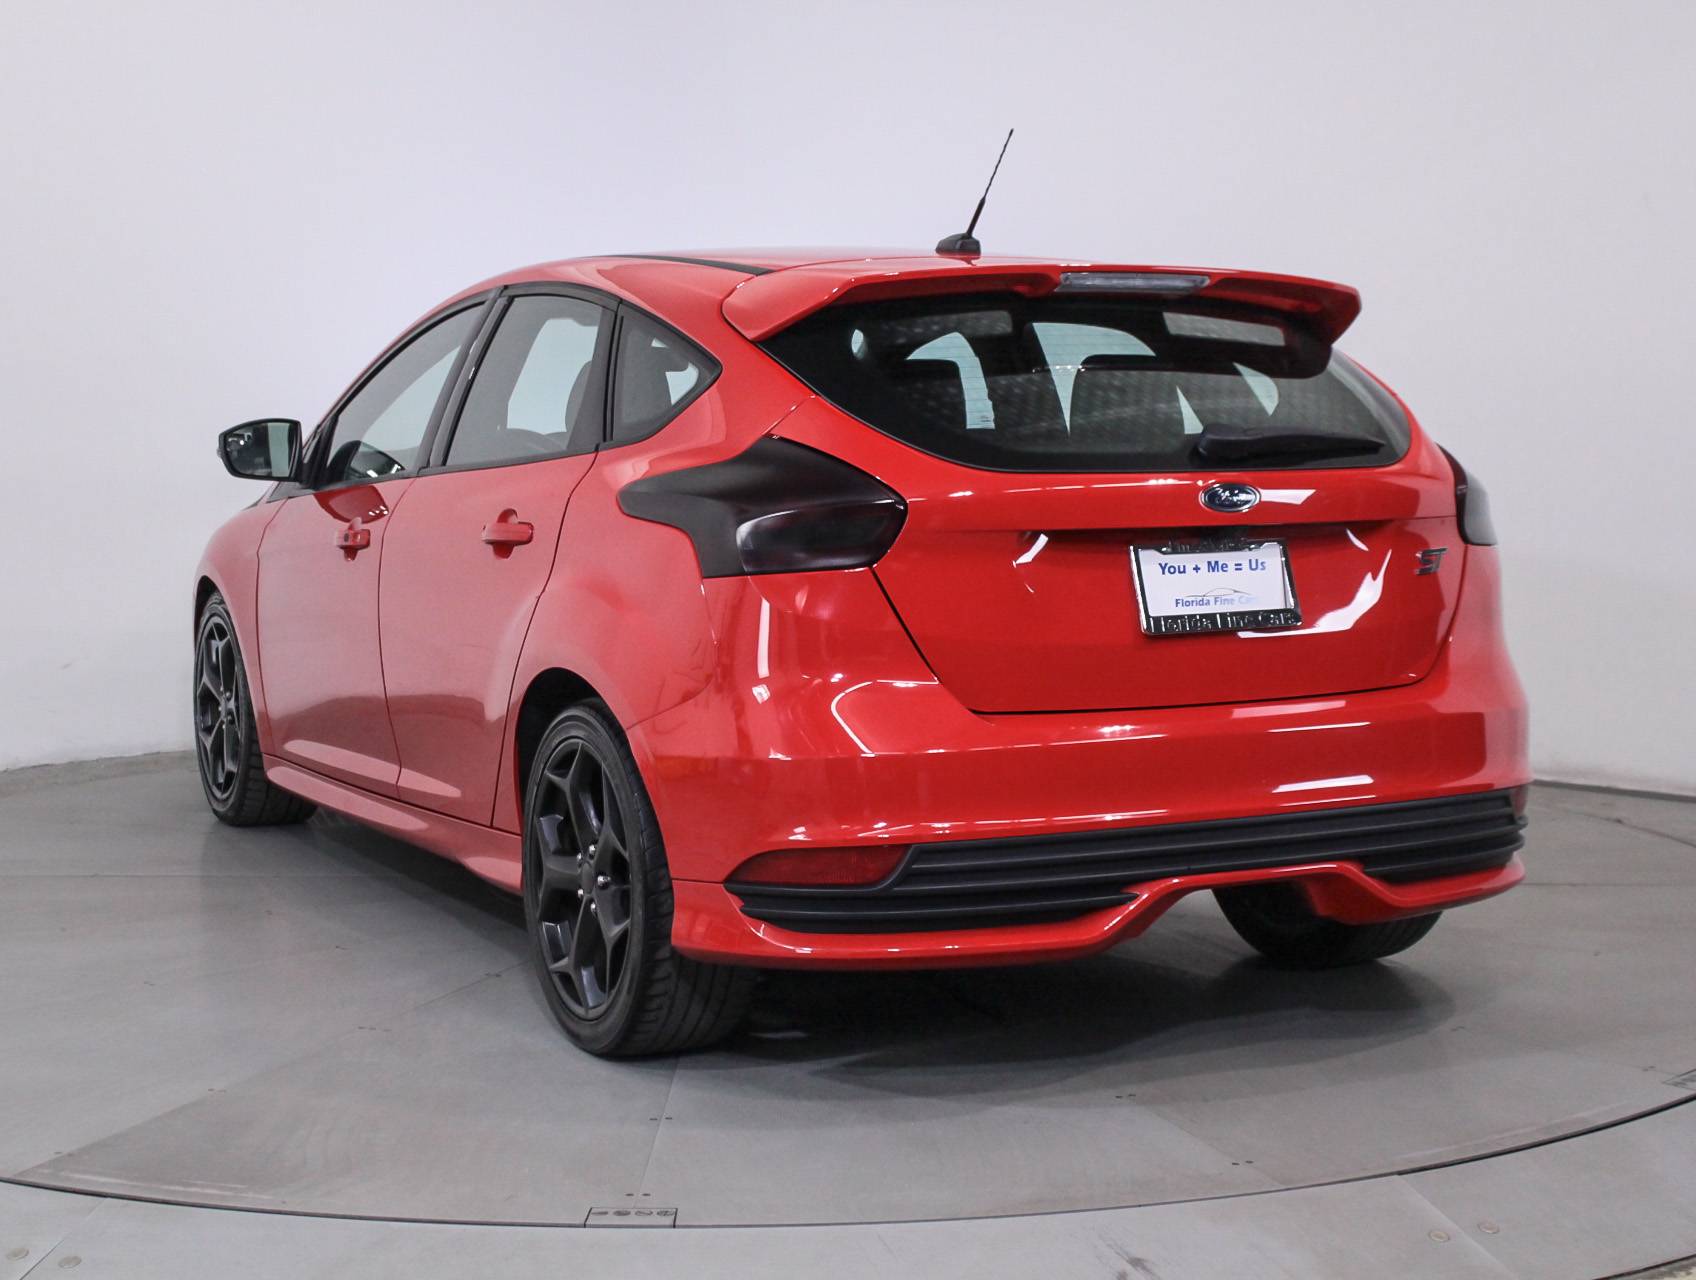 Florida Fine Cars - Used FORD FOCUS 2015 MARGATE ST